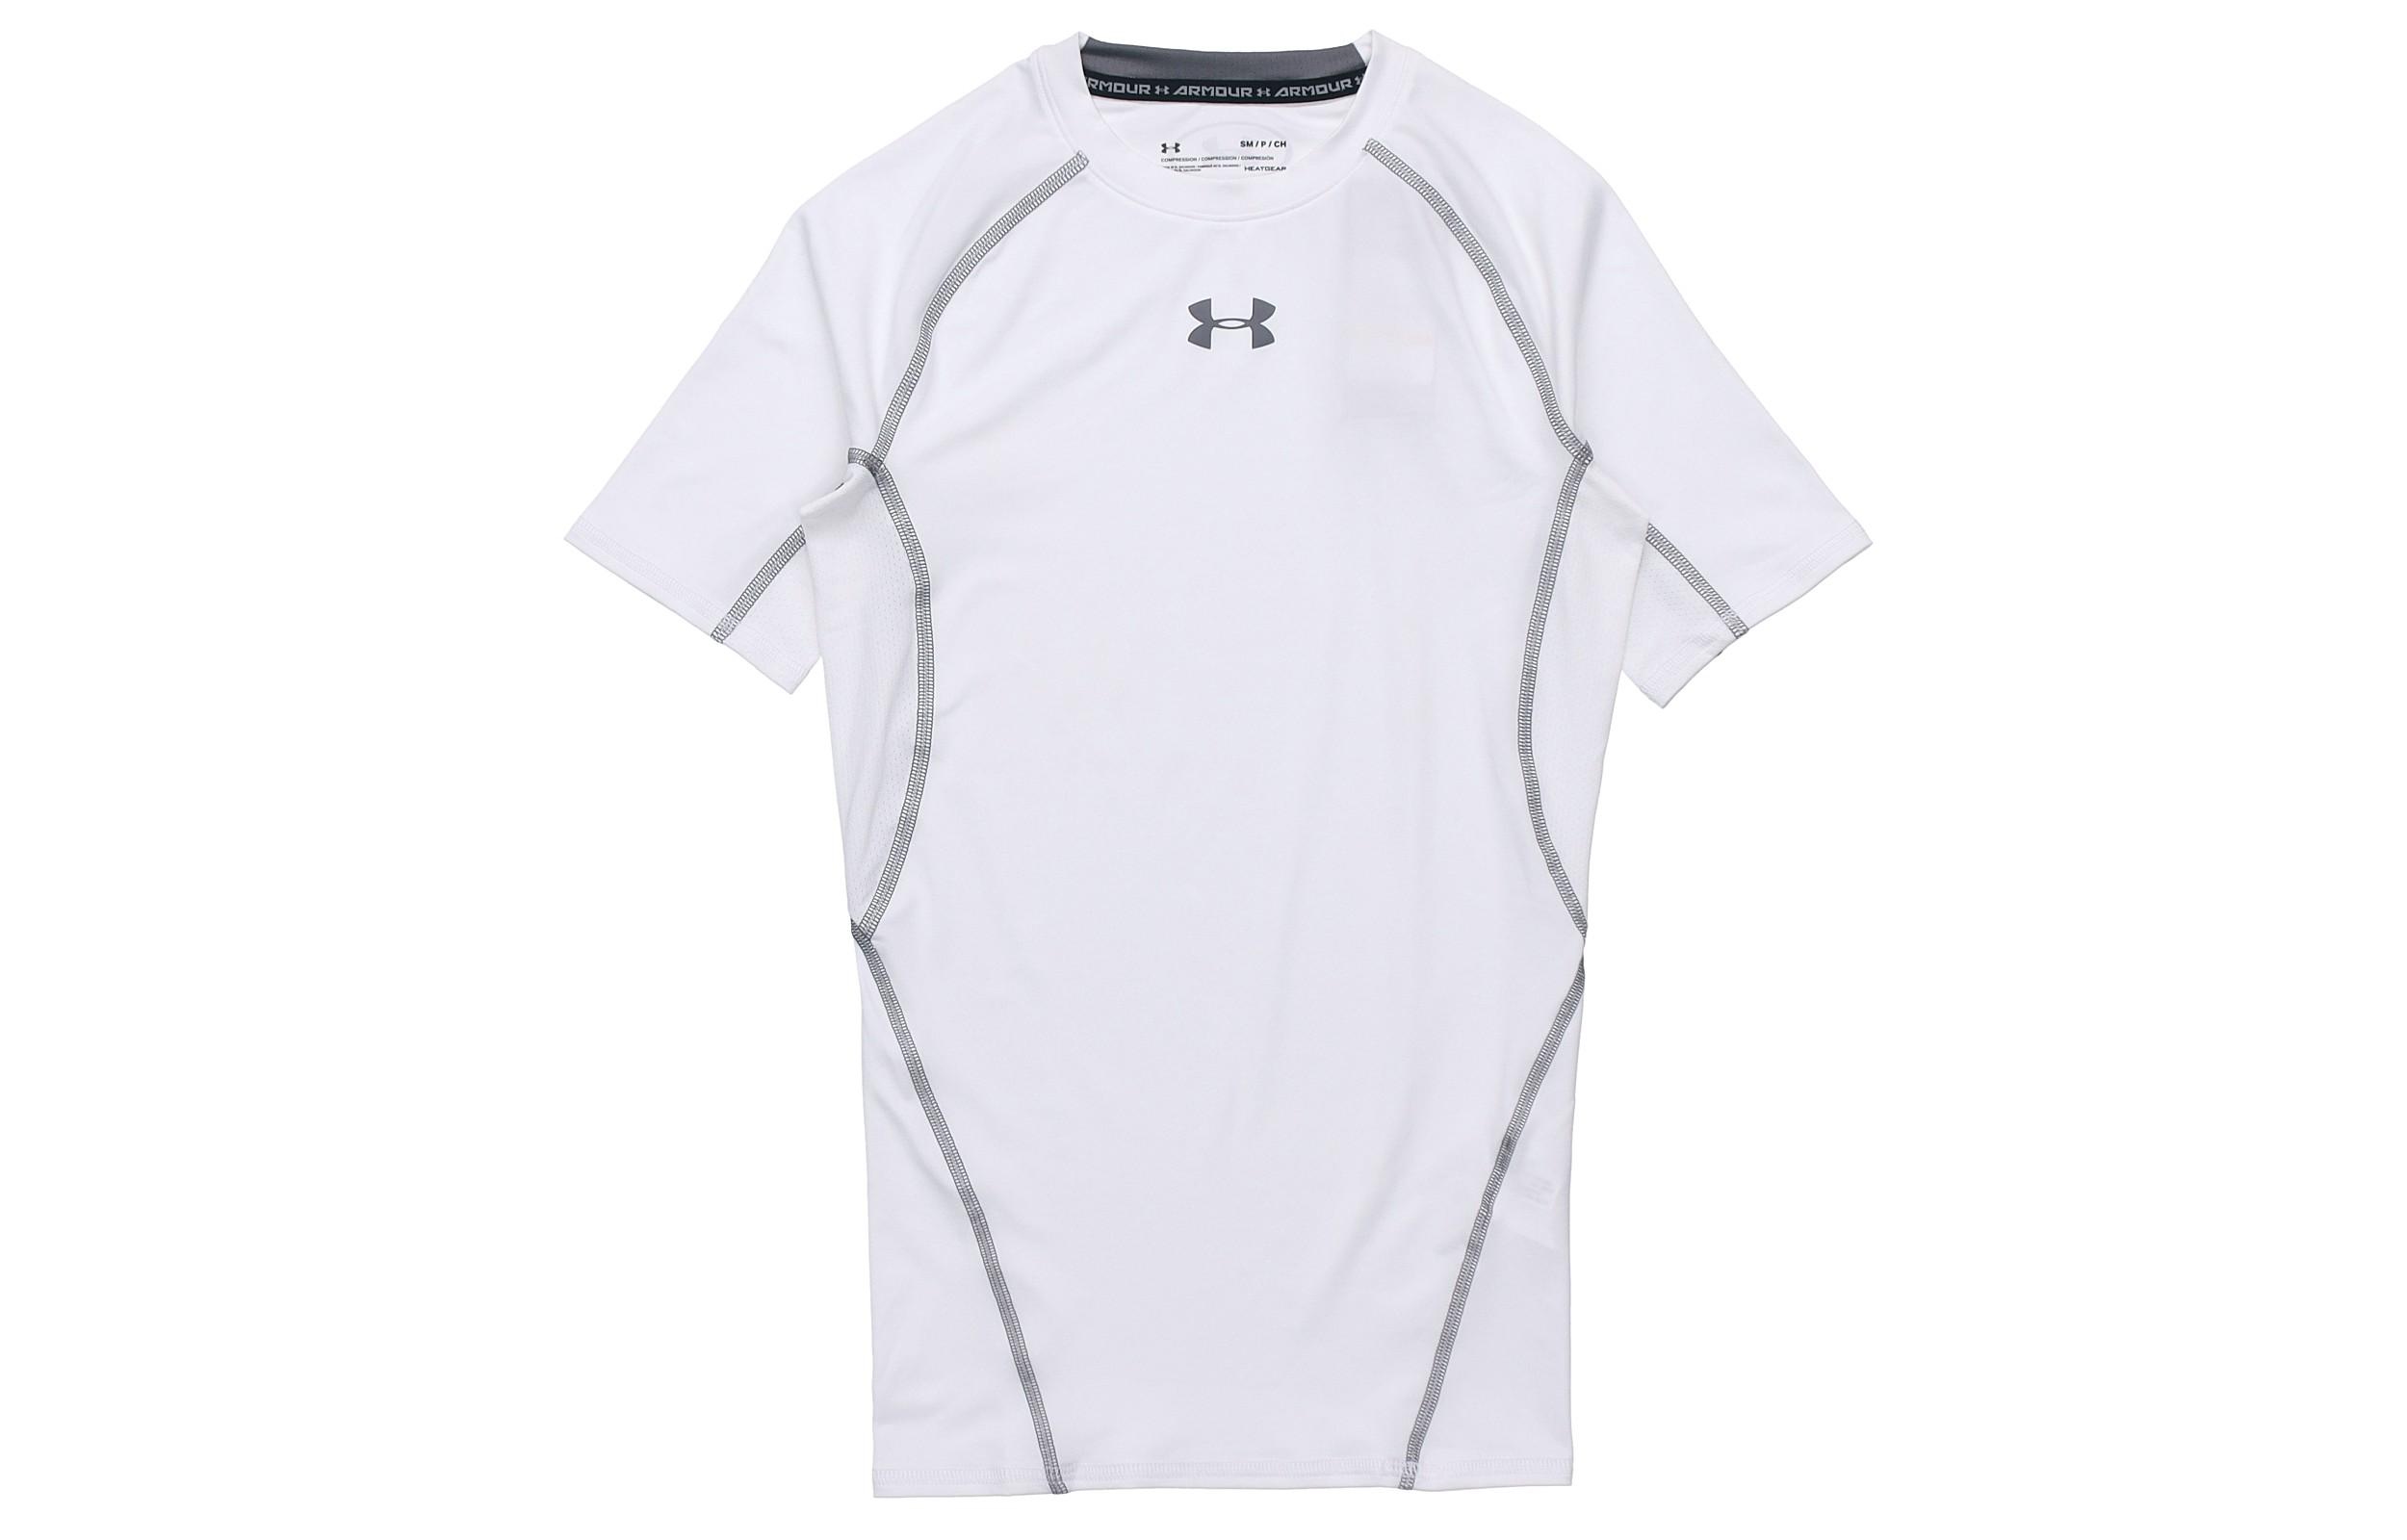 Under Armour T